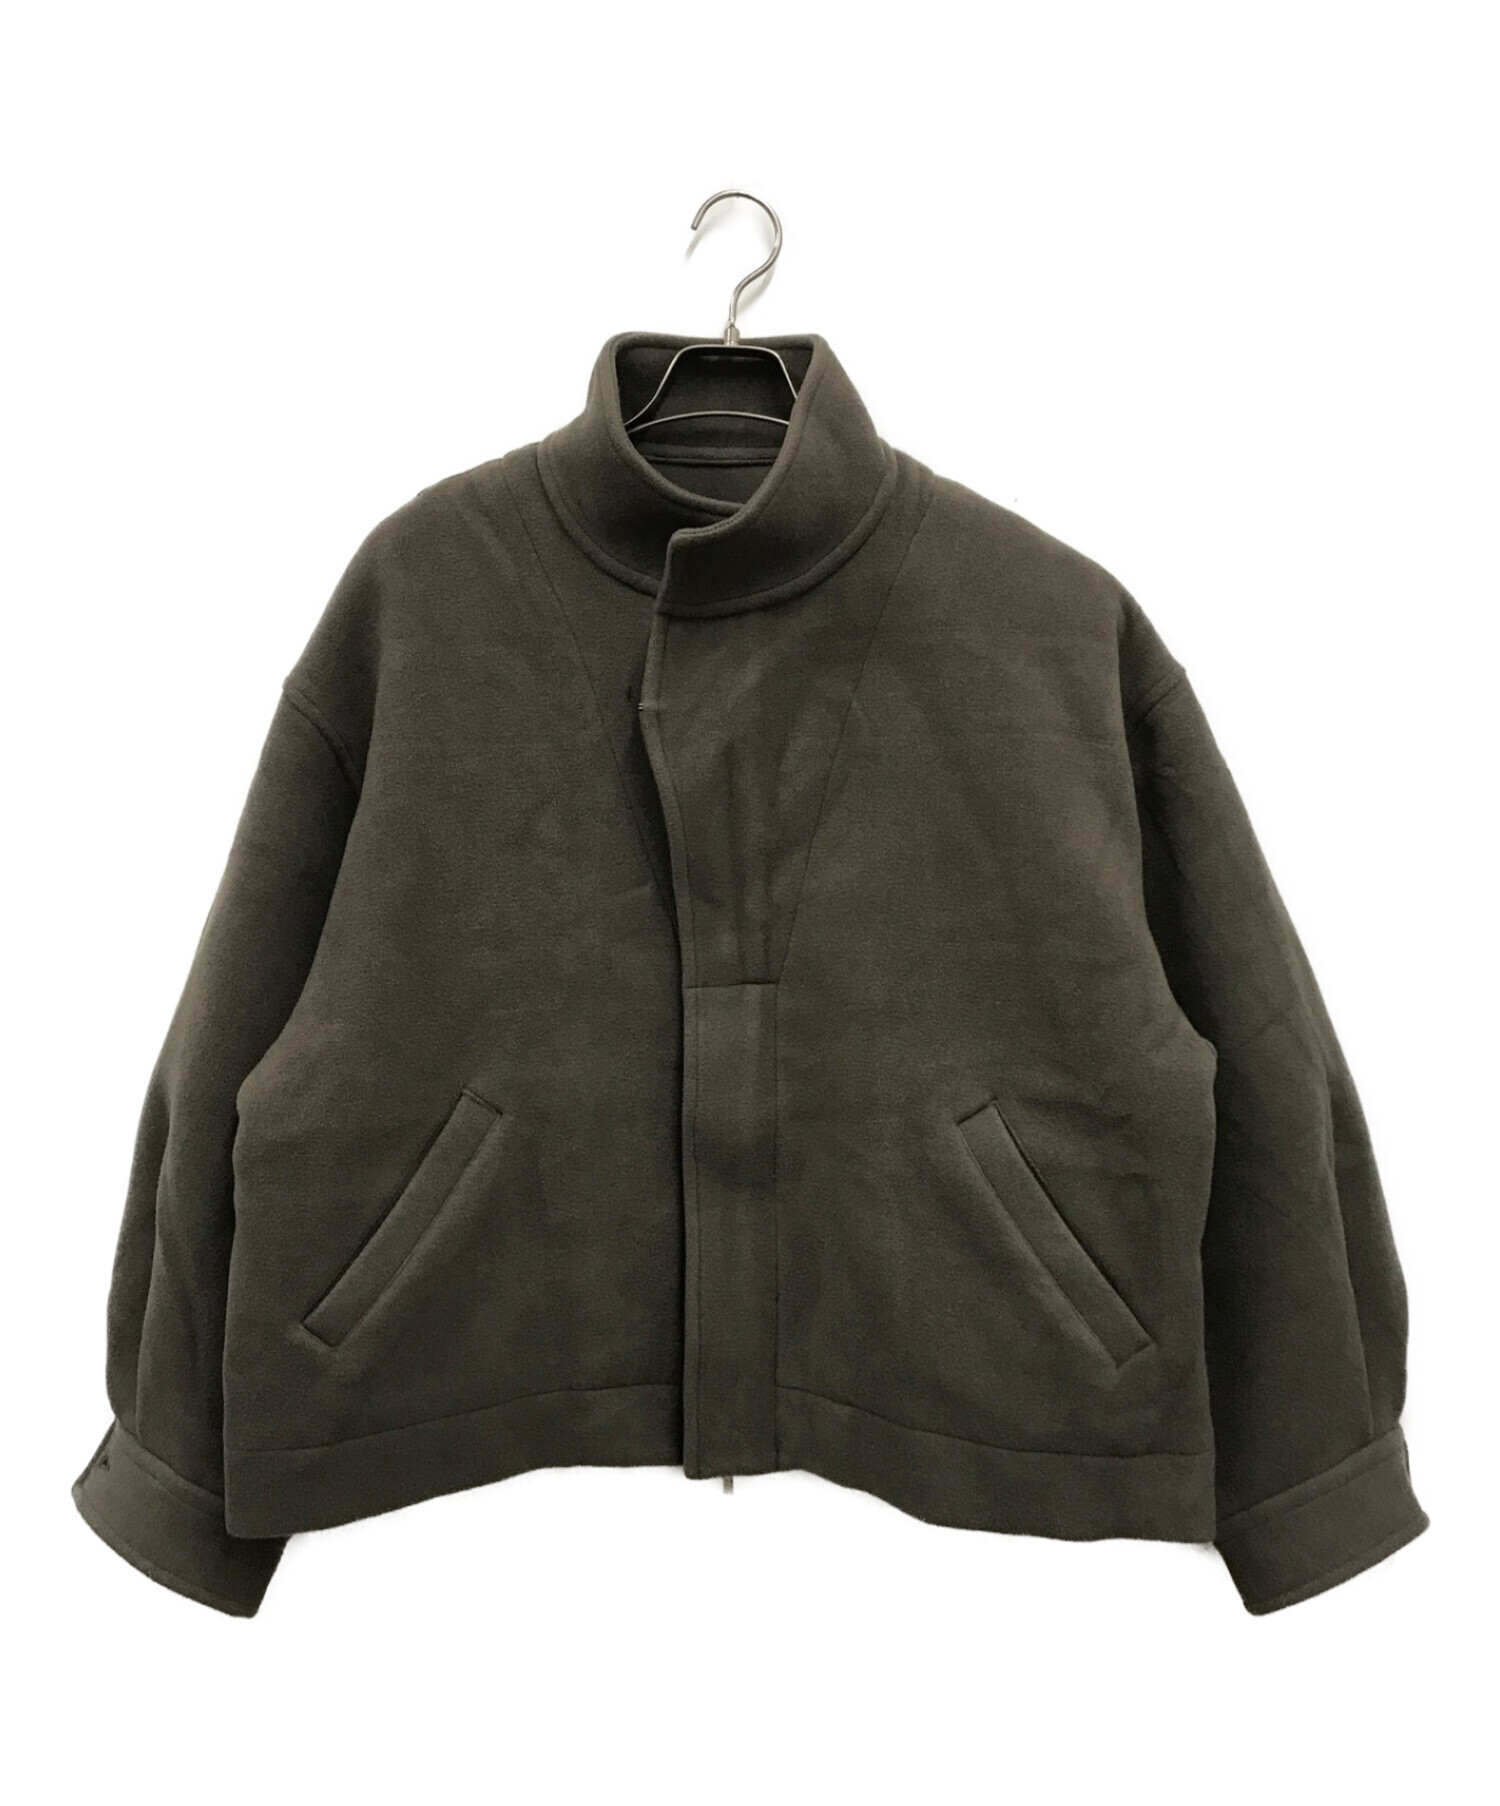 stein OVER SLEEVE MELTON JACKET S - ブルゾン